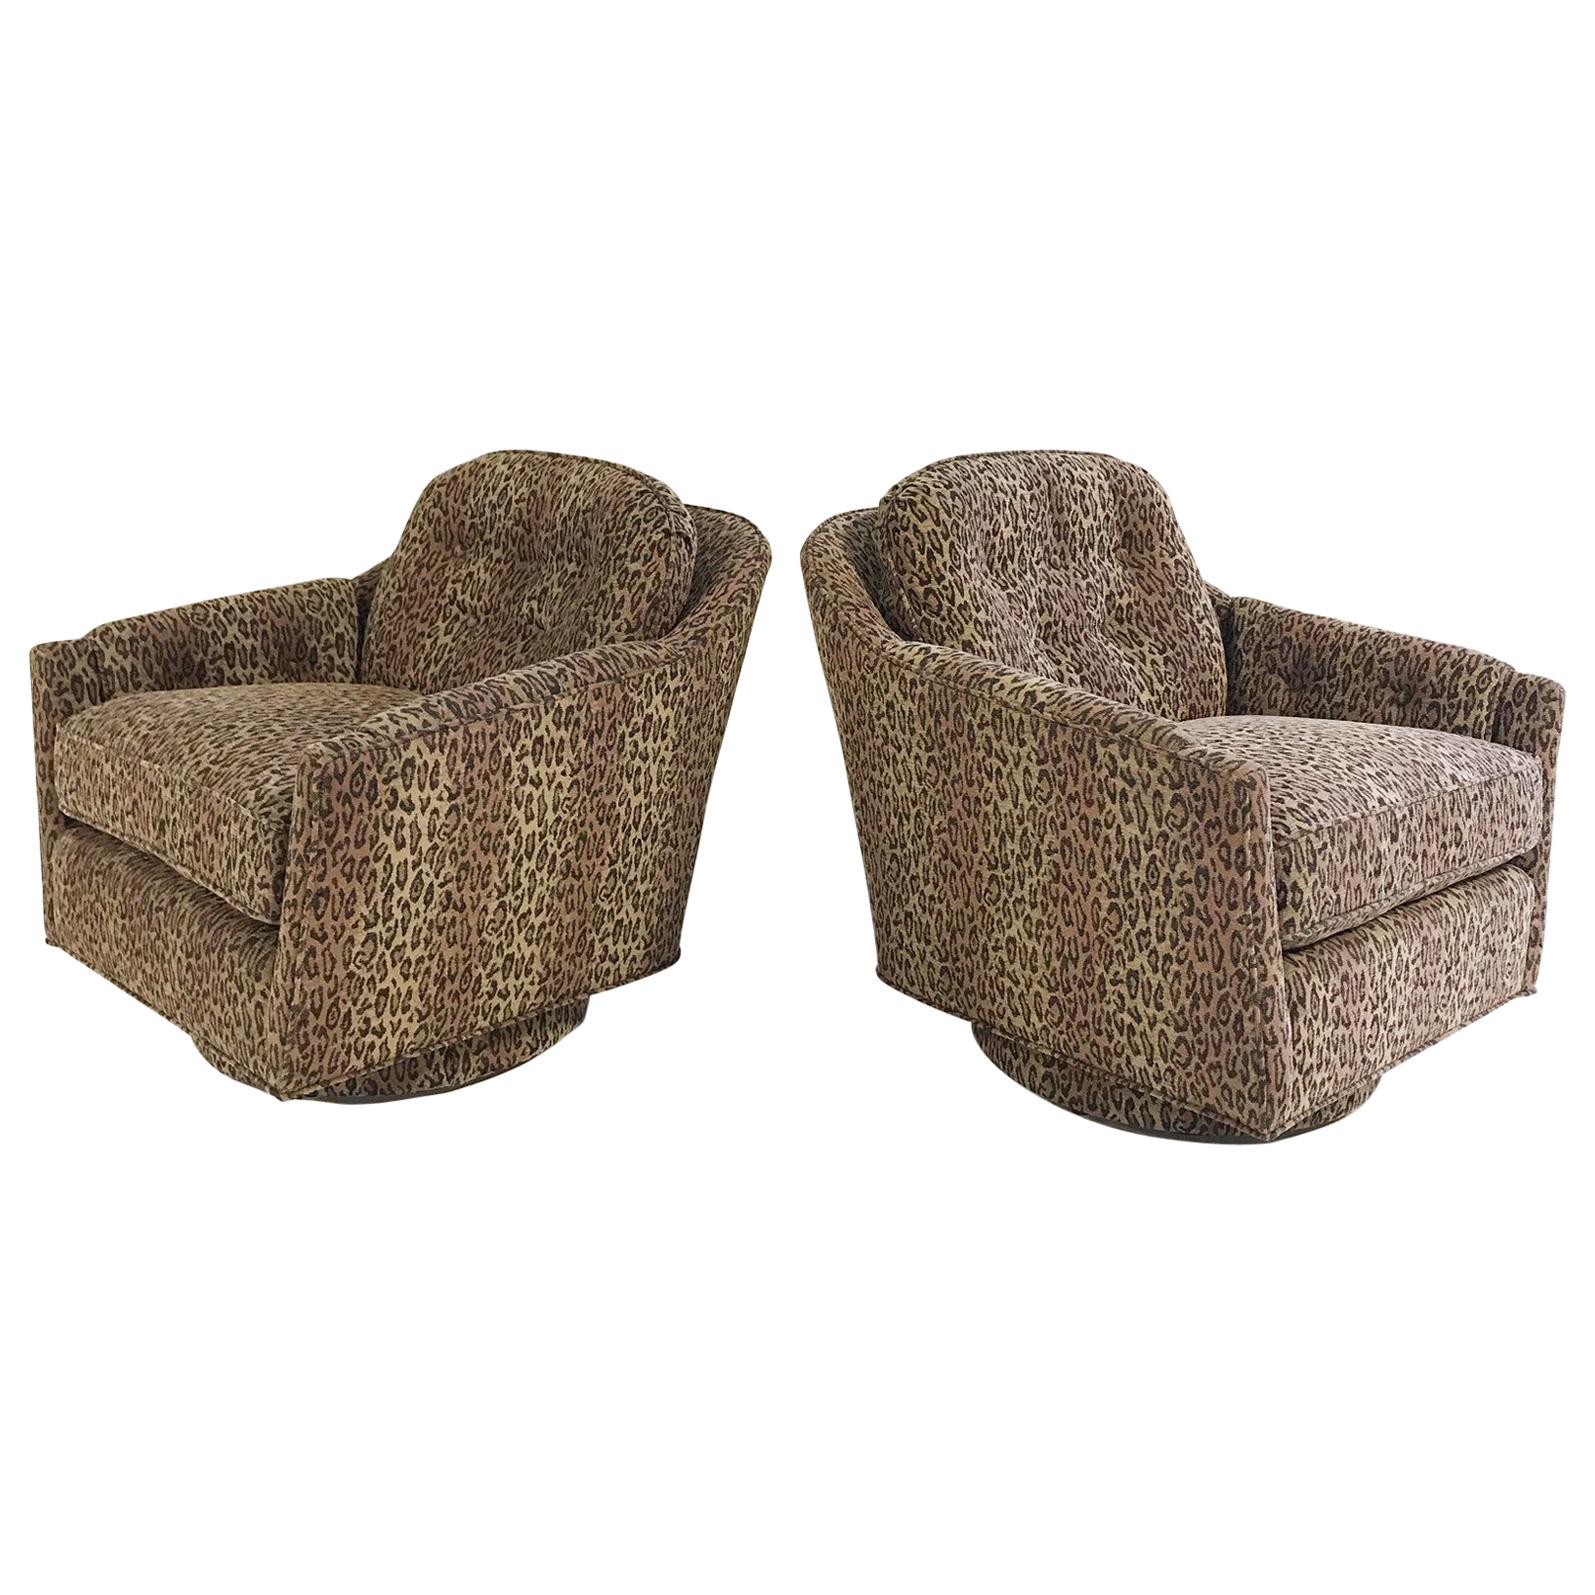 Swivel Lounge Chairs in the style of Milo Baughman, in Kravet Leopard Print